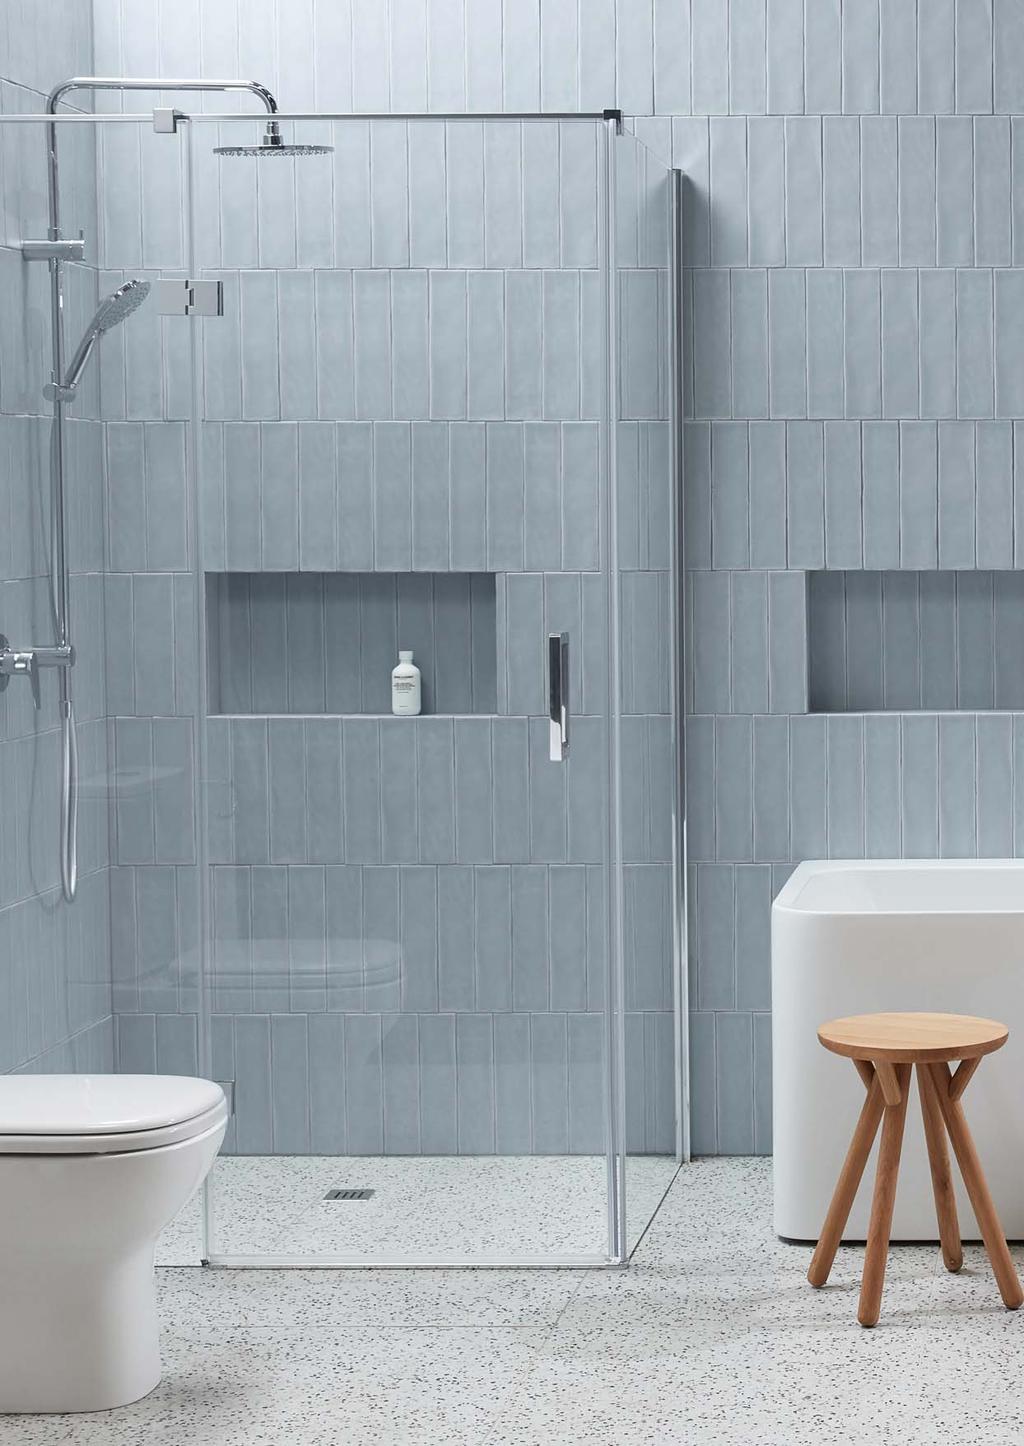 Forever Bathrooms Bathroom Happiness TM Visit any one of our 300 showrooms around Australia for all the latest products, concepts and inspiration to make your bathroom whatever you want it to be.